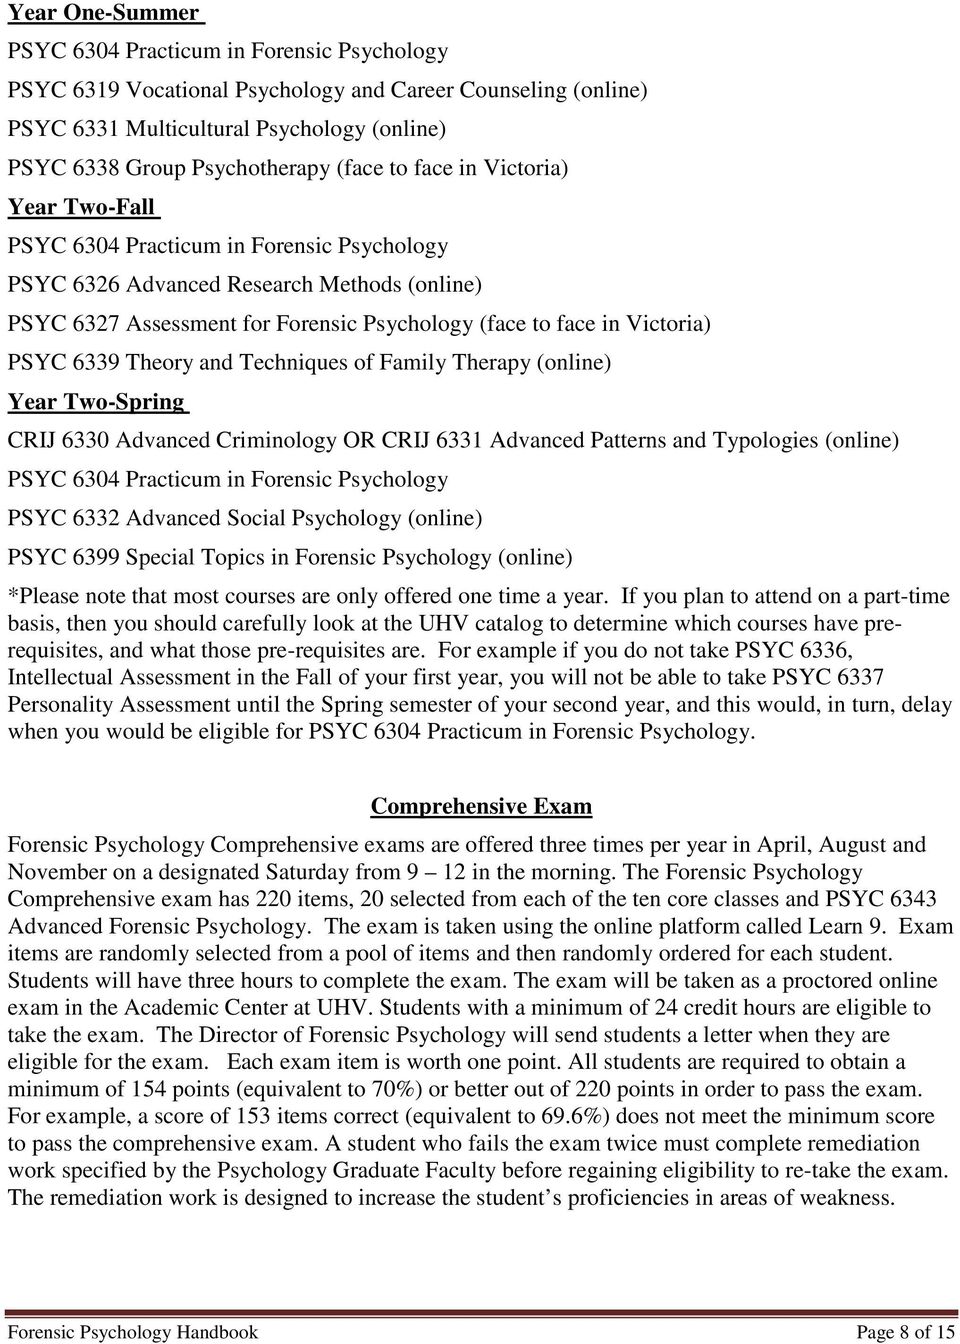 Victoria) PSYC 6339 Theory and Techniques of Family Therapy (online) Year Two-Spring CRIJ 6330 Advanced Criminology OR CRIJ 6331 Advanced Patterns and Typologies (online) PSYC 6304 Practicum in